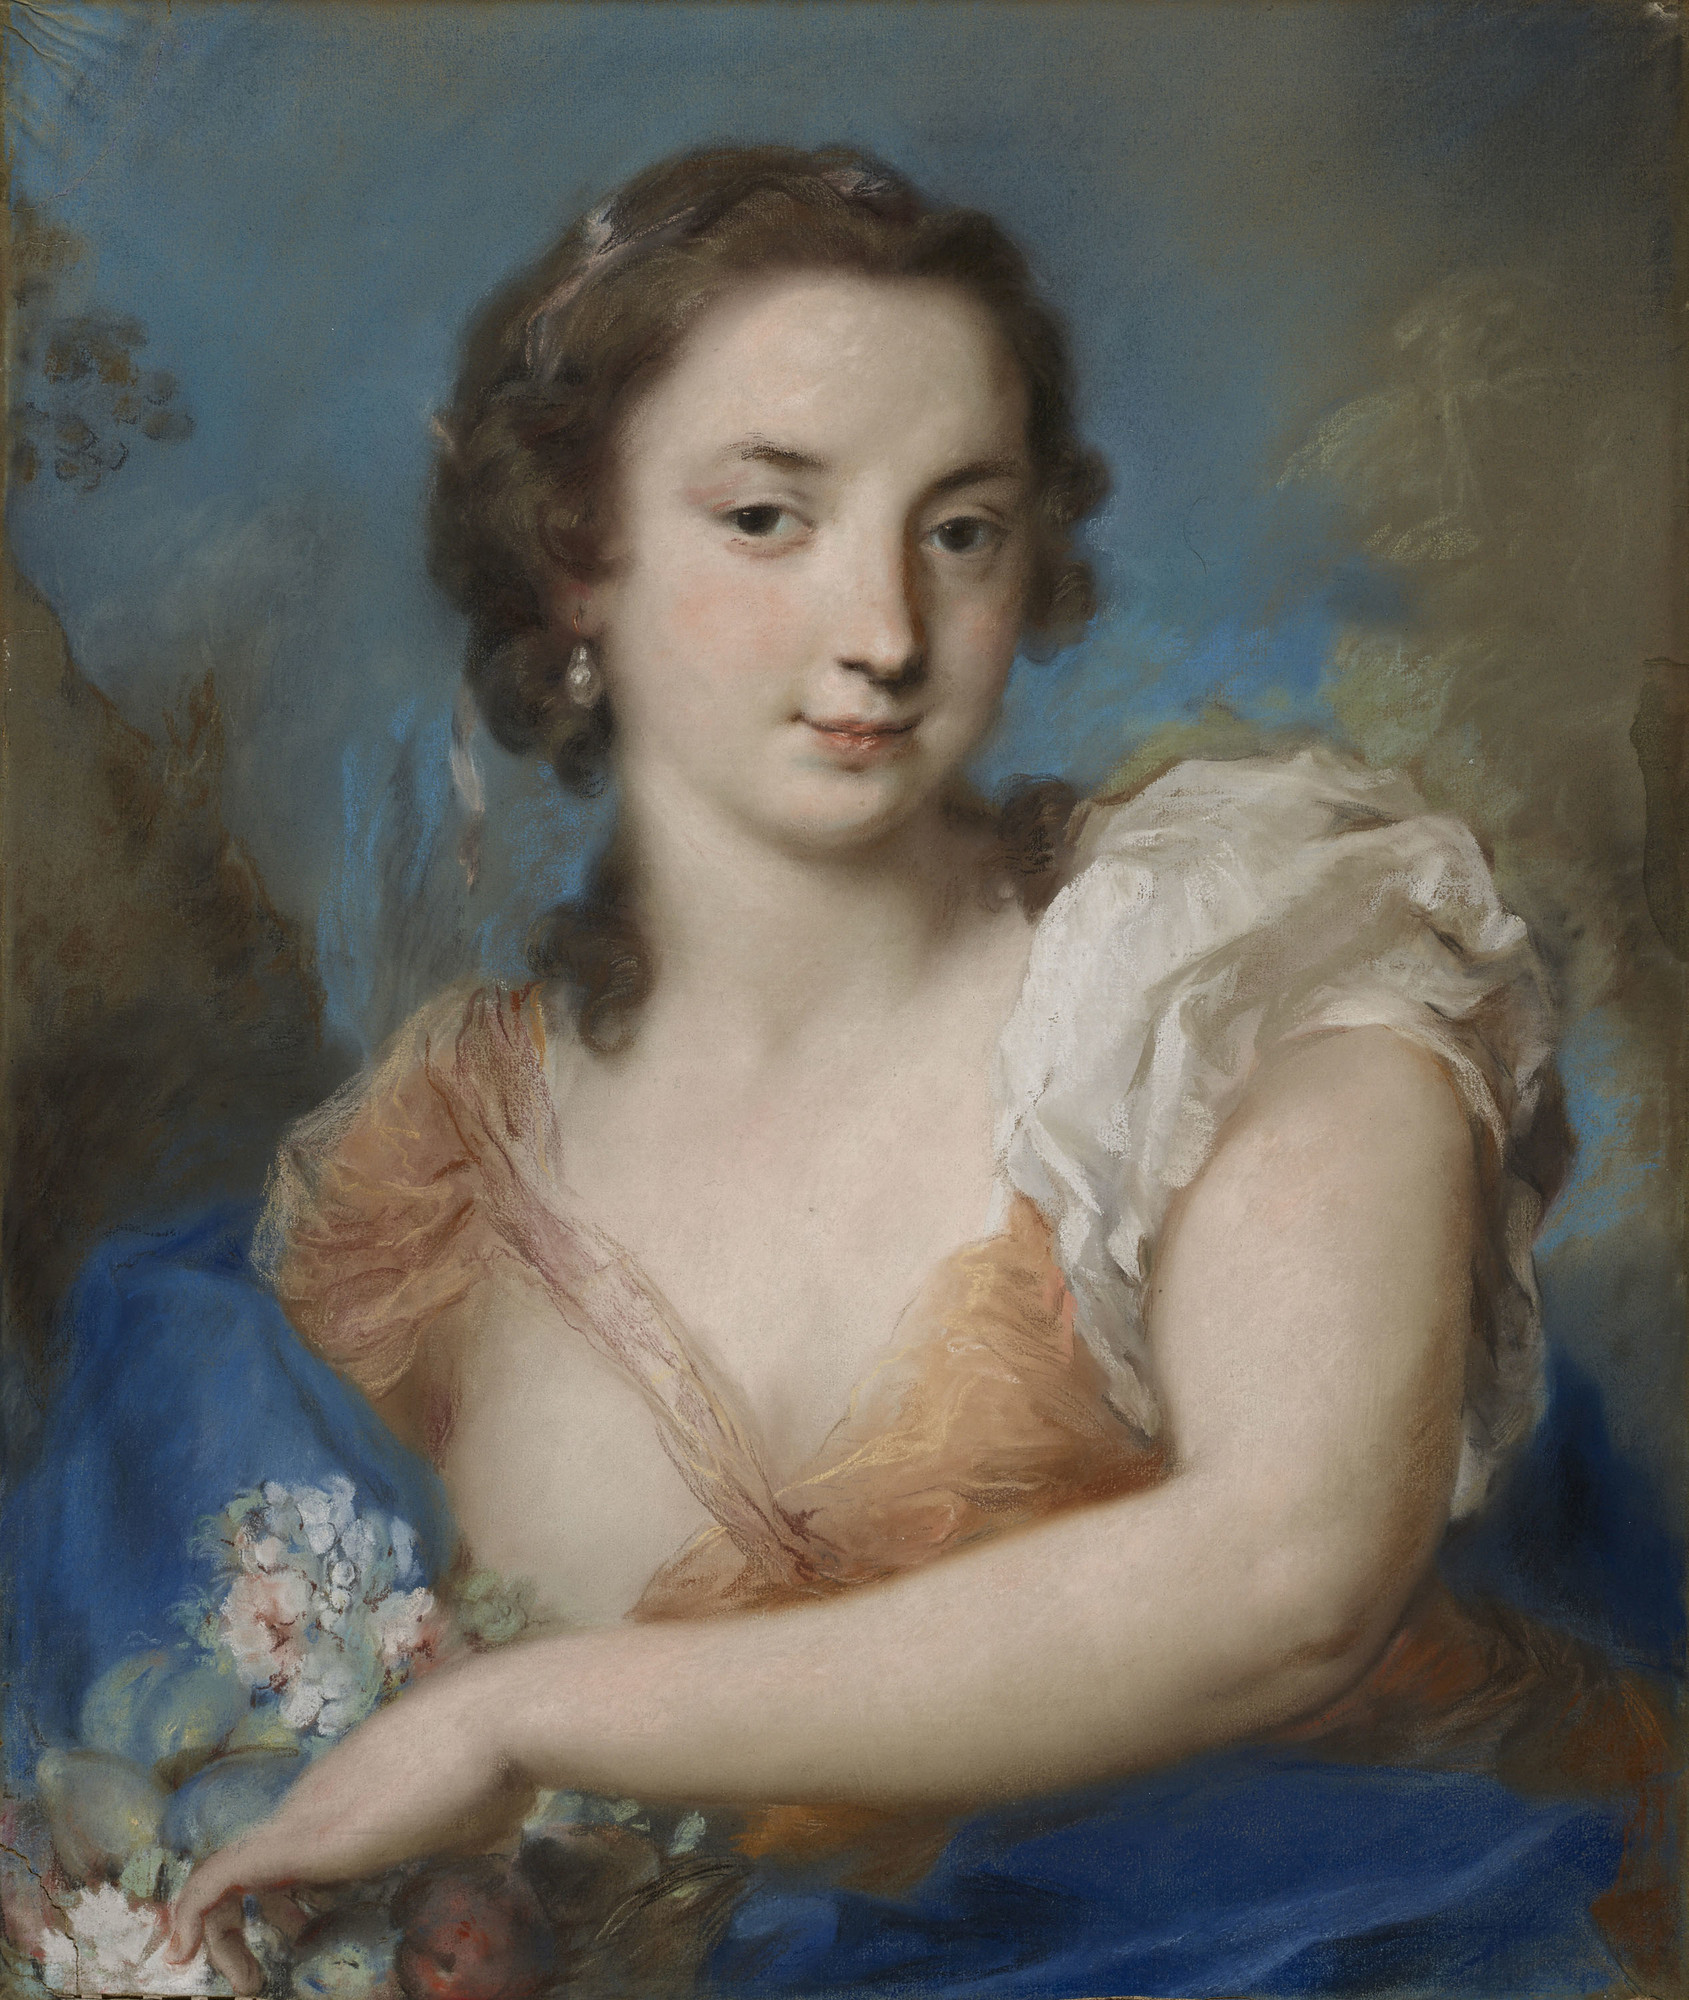 A half-length portrait of the personification of summer, who is pictured as a young woman holding a basket of fruit and flowers. She looks directly at the viewer with a slight smile. She wears a white, pink, and blue gown and large pearl earrings.